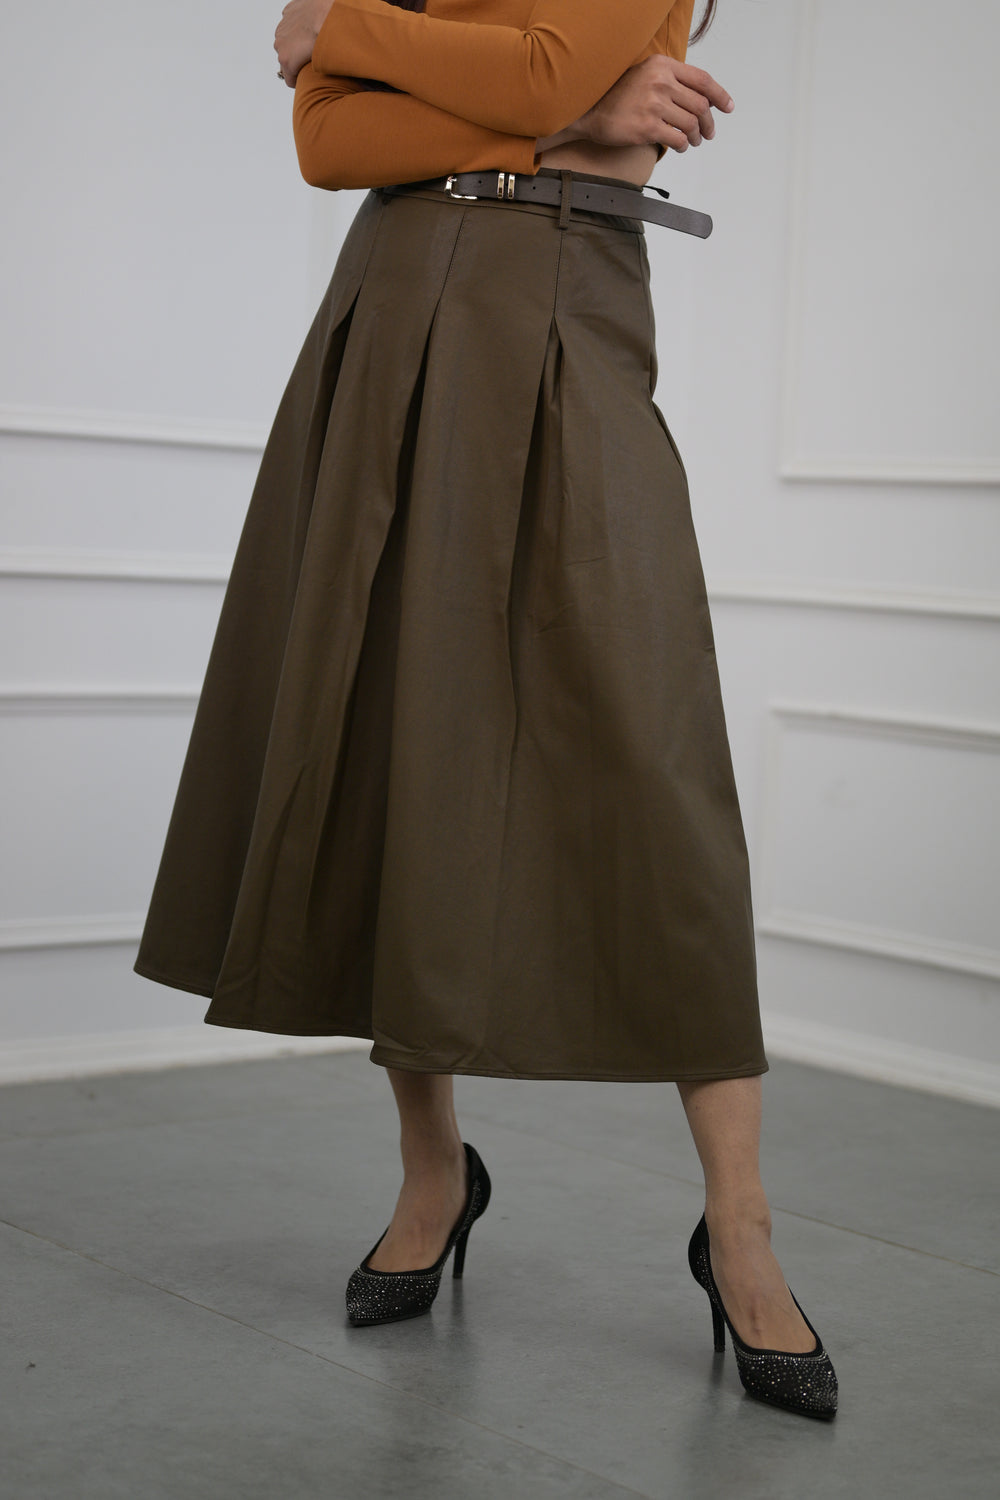 Flared faux leather skirt for vacation wear